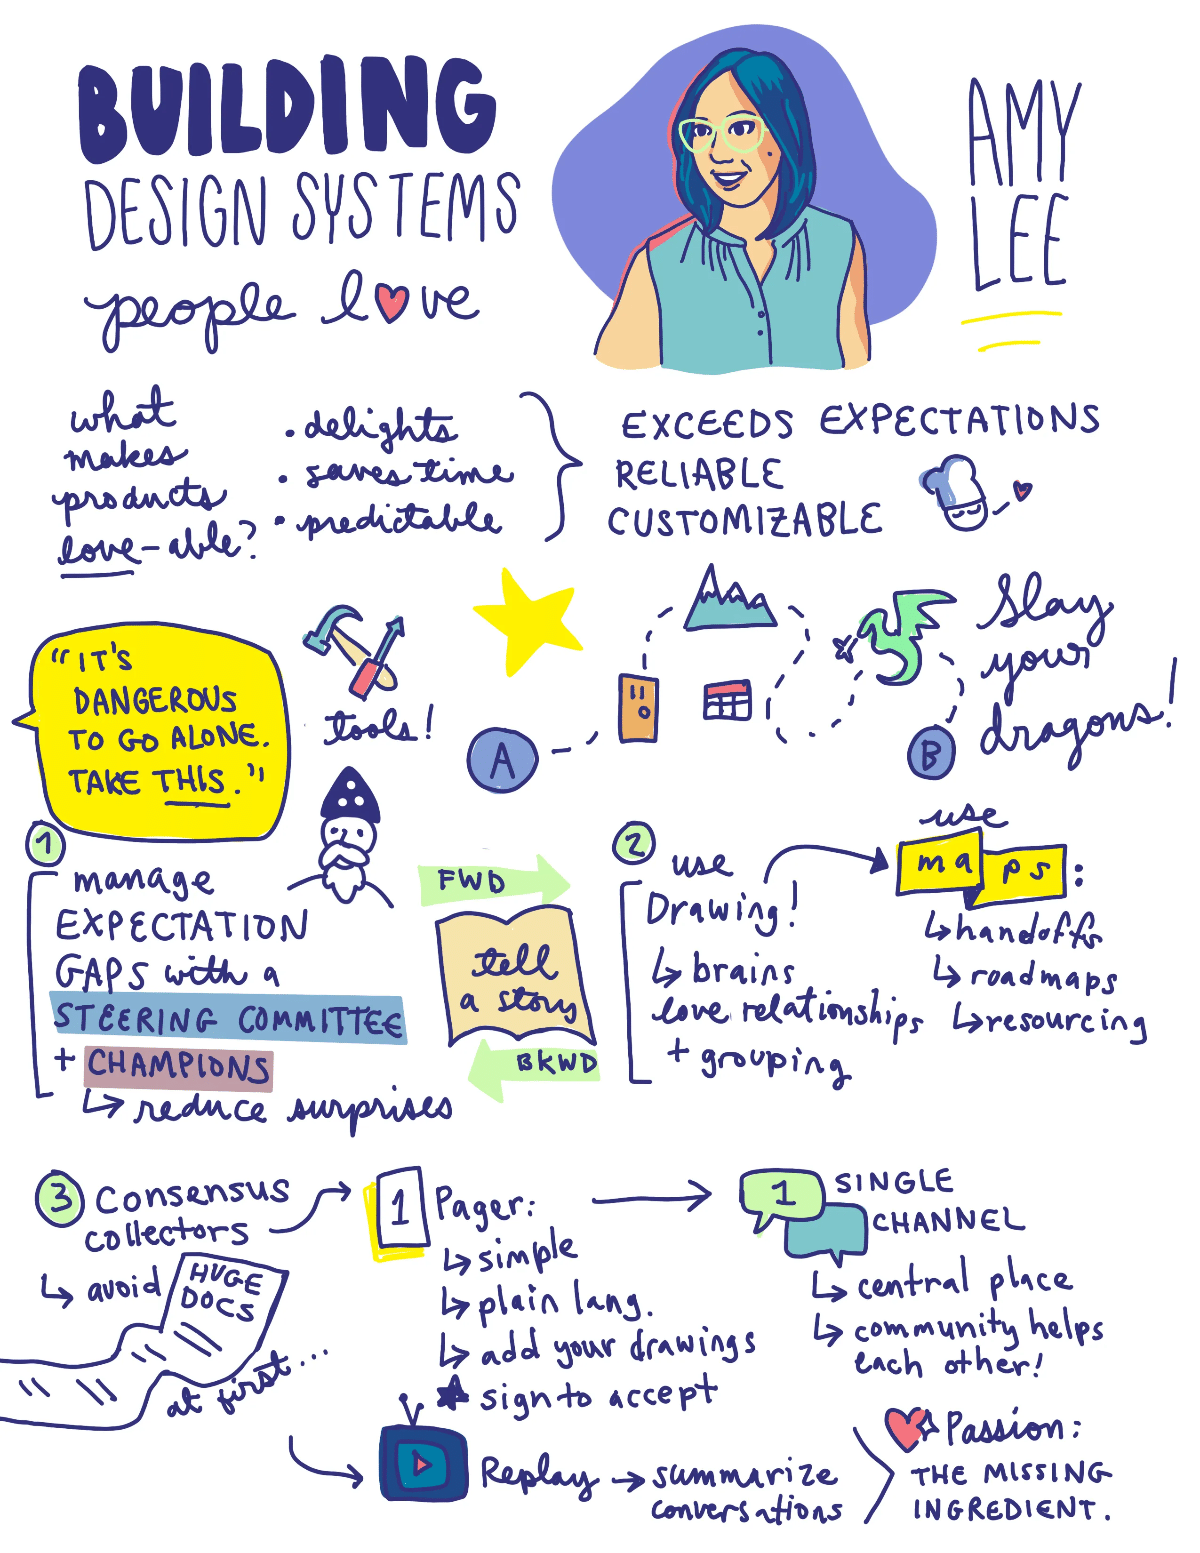 sketchnote for Amy Lee Building Design Systems people love